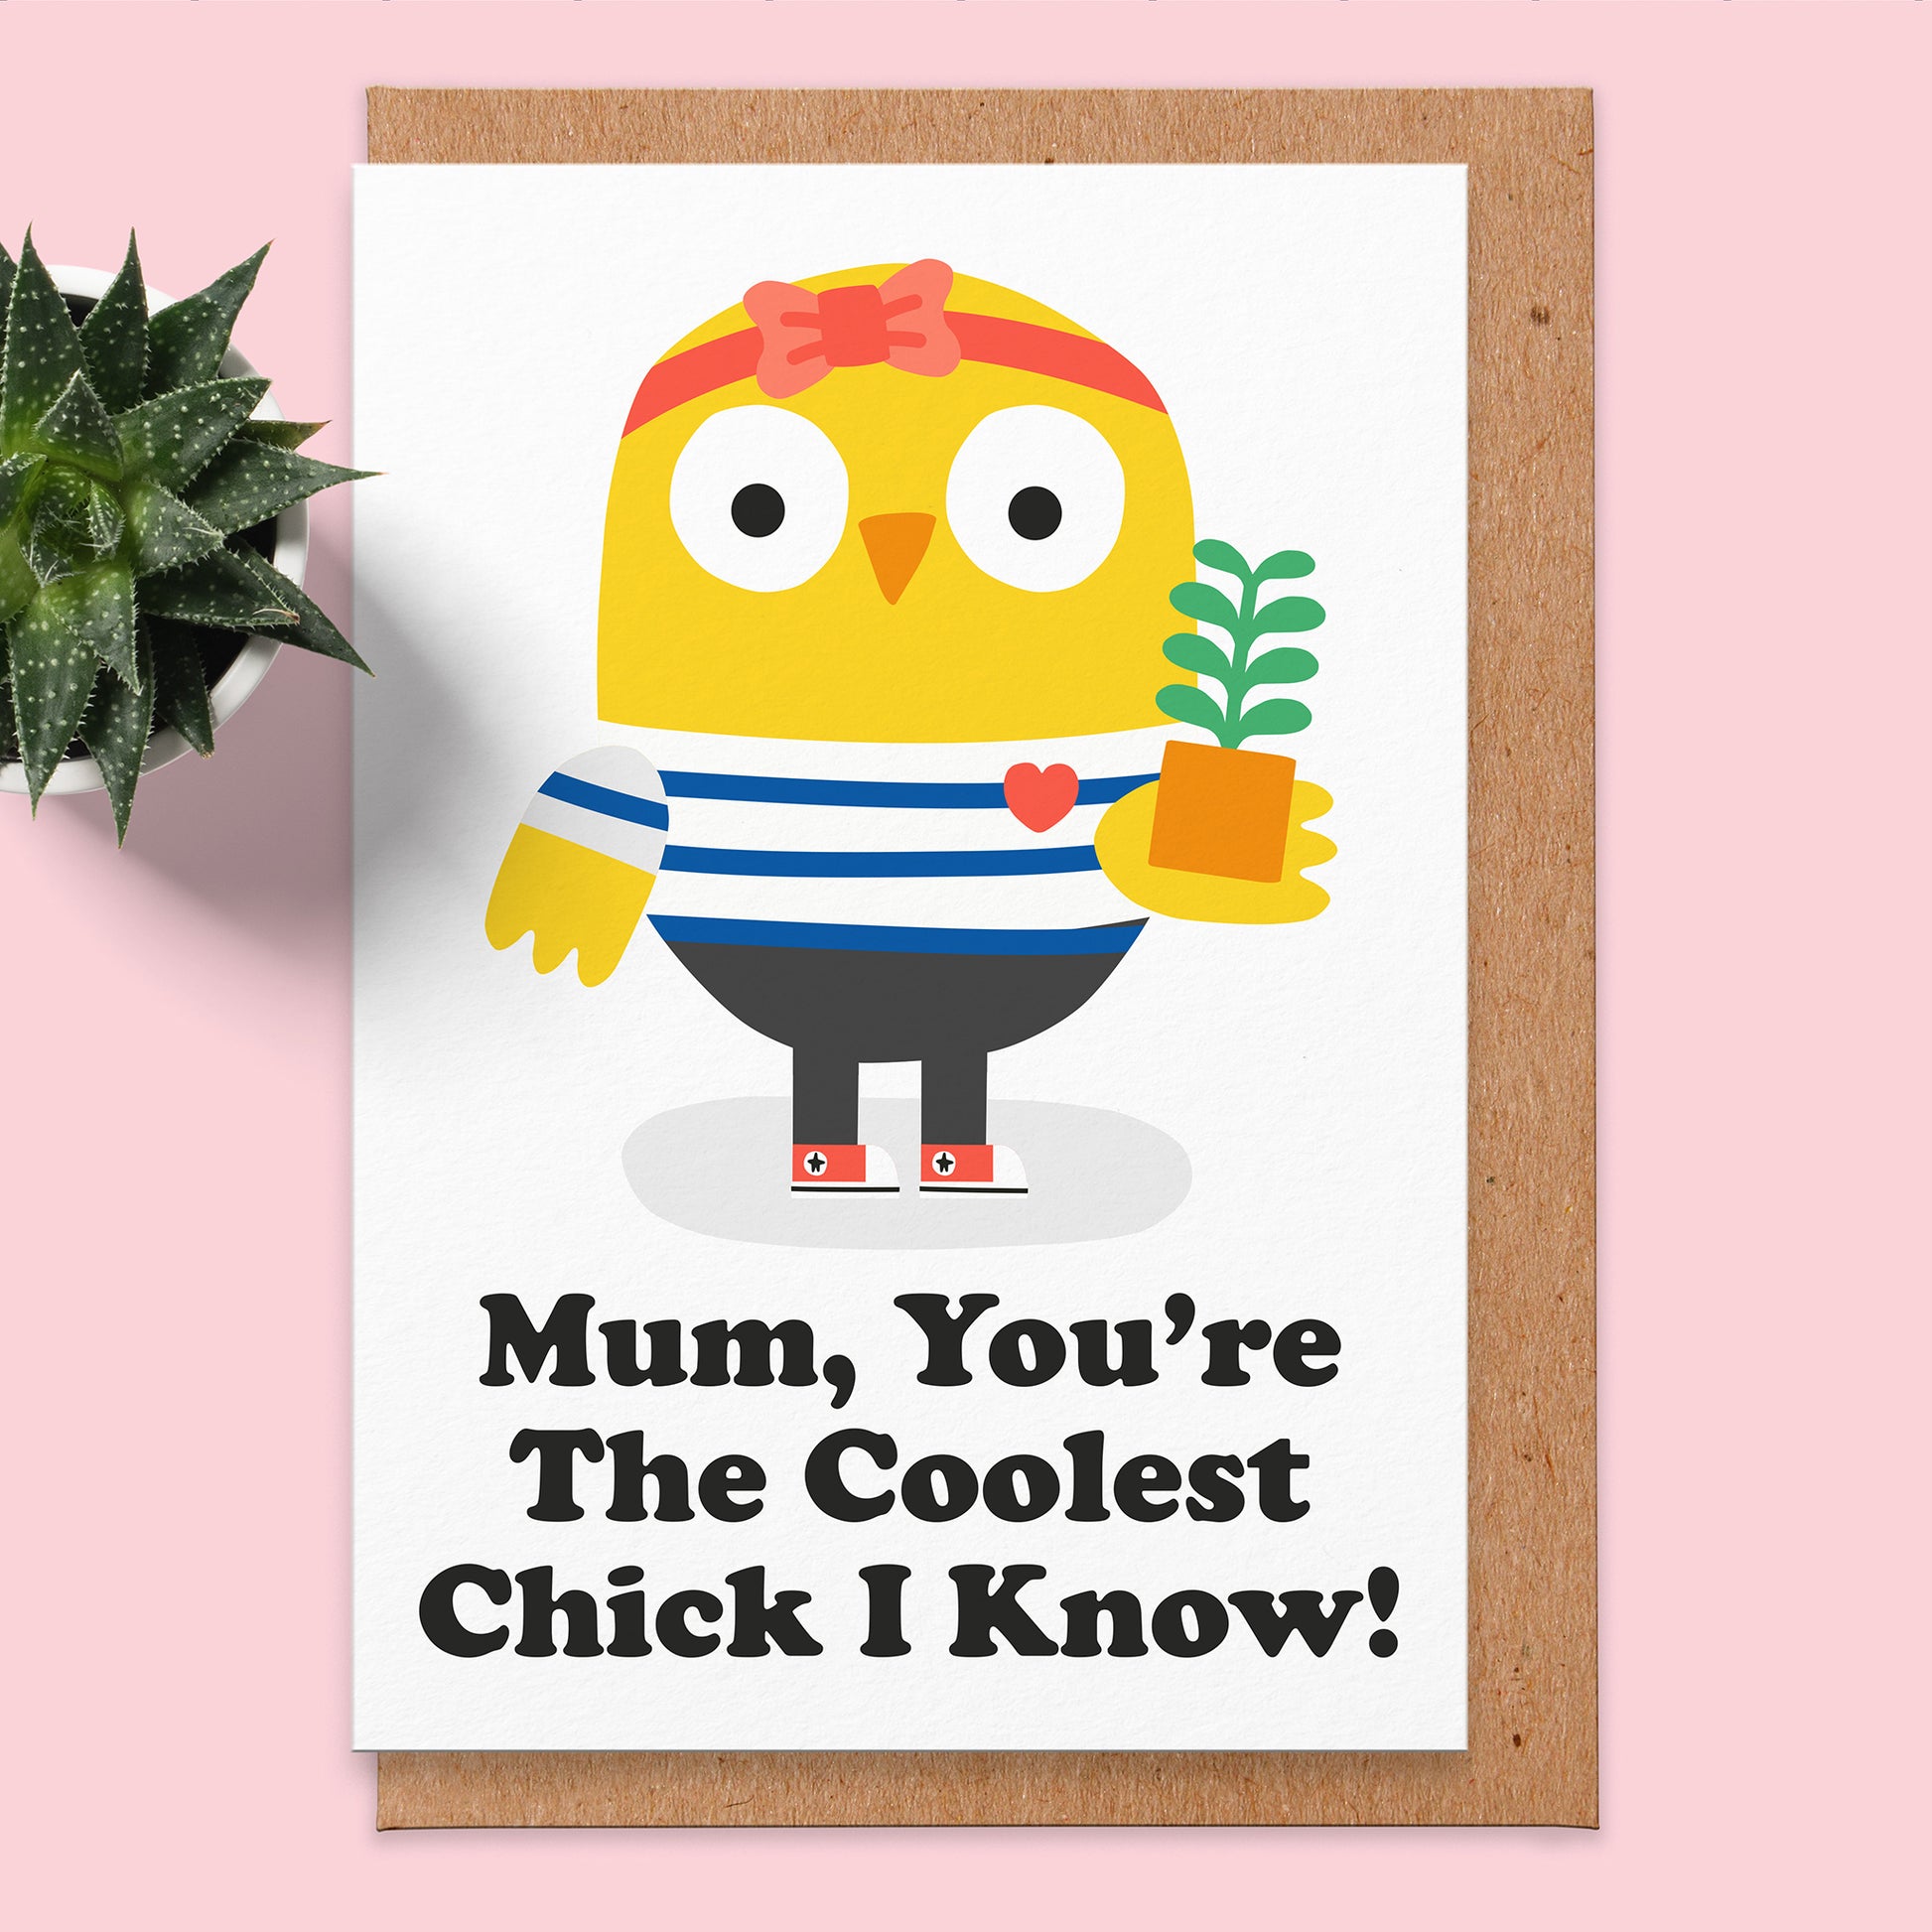 Mother's Day card that says Mum, You're The Coolest Chick I Know! it has an illustration of a Chick holding a plant